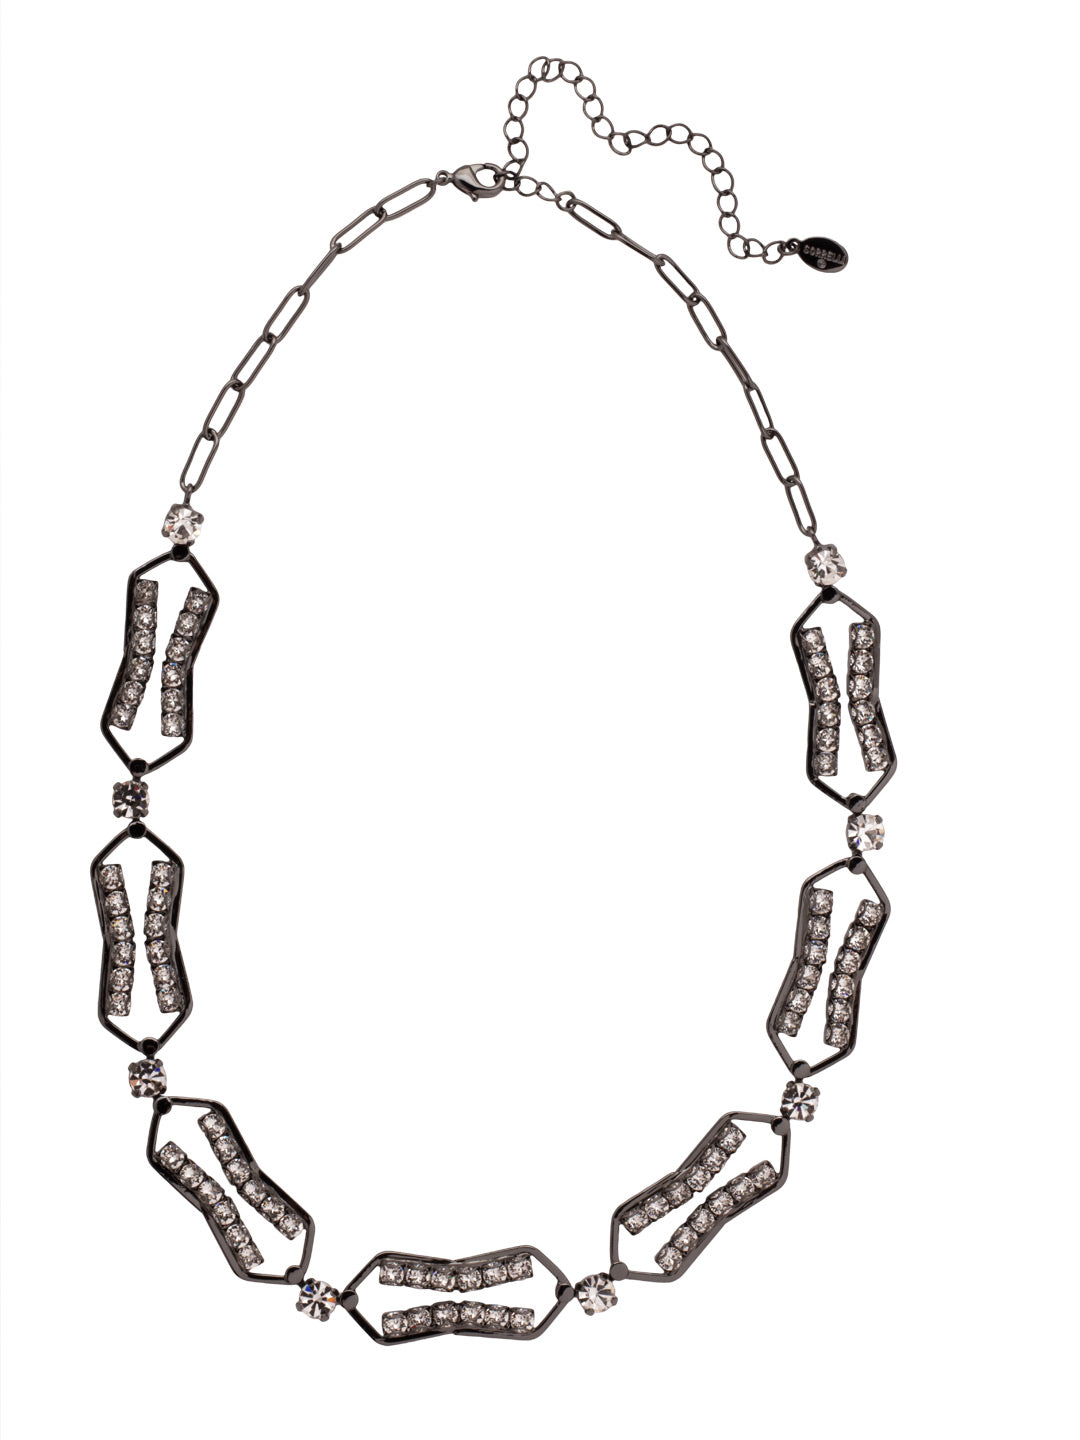 Roslyn Statement Necklace - 4NFC18GMCRY - <p>The Roslyn Statement Necklace features repeating hourglass shaped metal hoops with two lines of crystals inside. From Sorrelli's Crystal collection in our Gun Metal finish.</p>